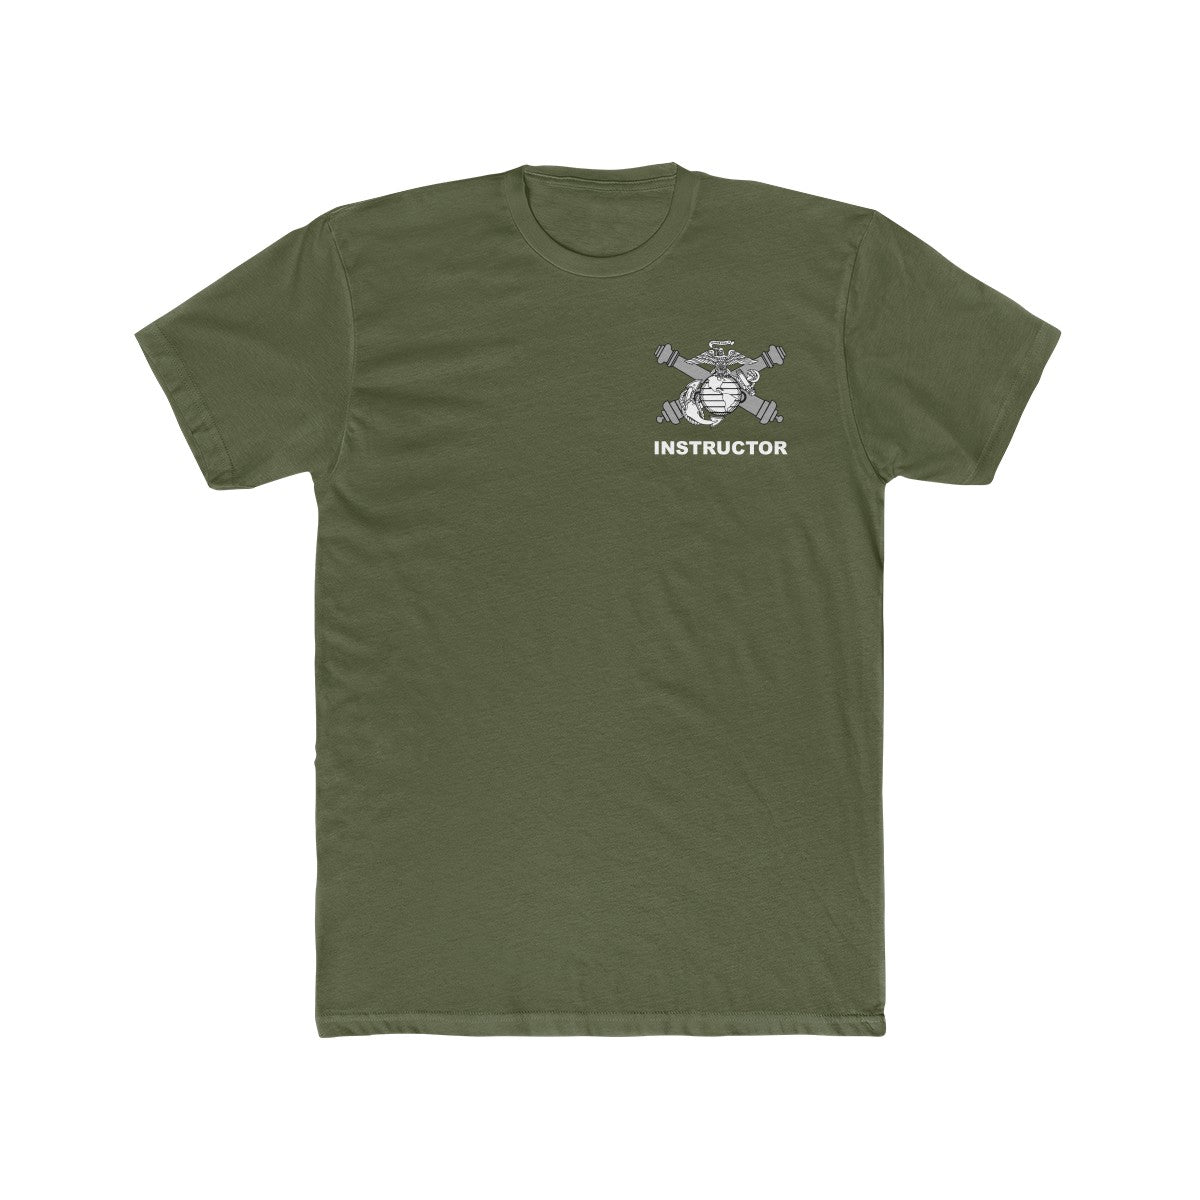 MAOBC Instructor Tee